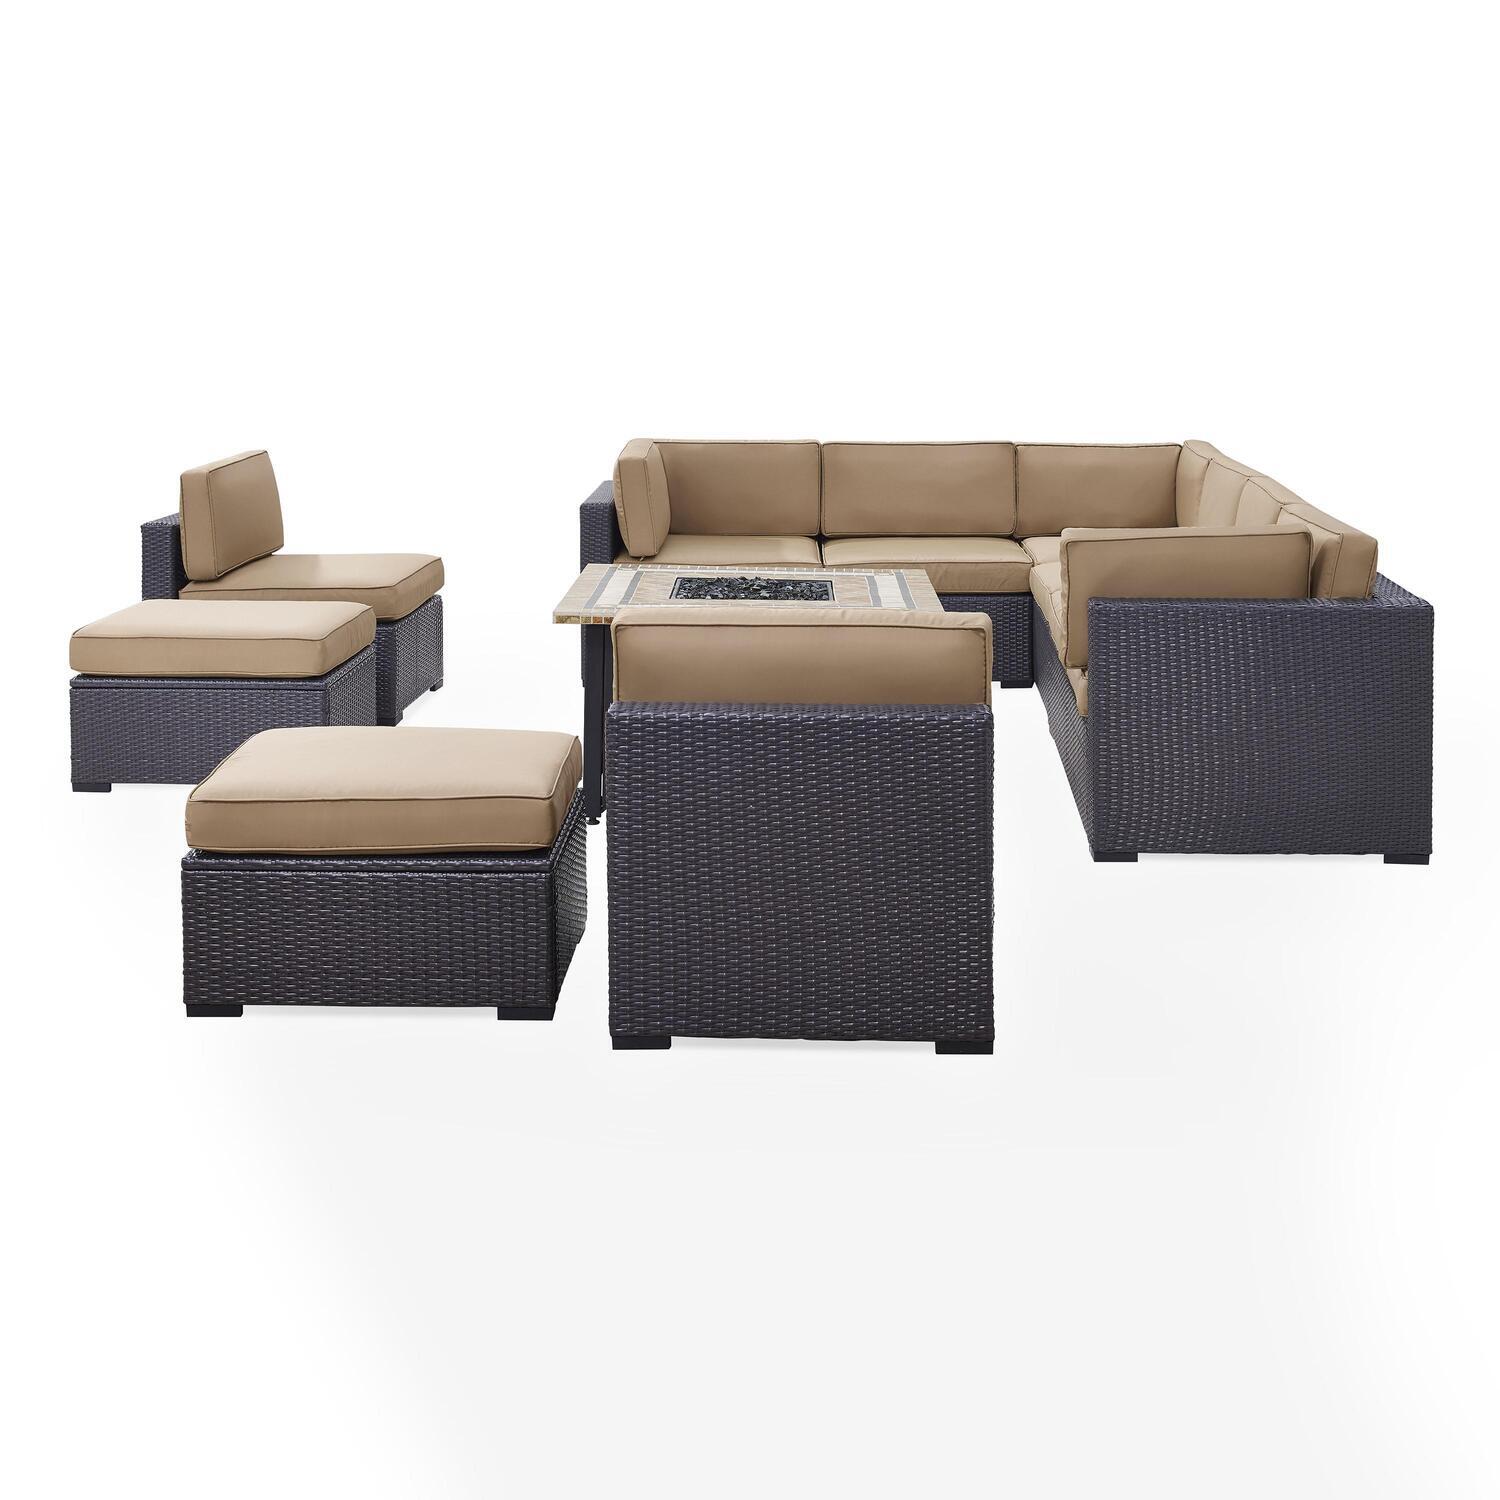 Crosley Furniture Biscayne 8 Piece Fabric Patio Fire Pit Sectional Set in Mocha - image 1 of 4